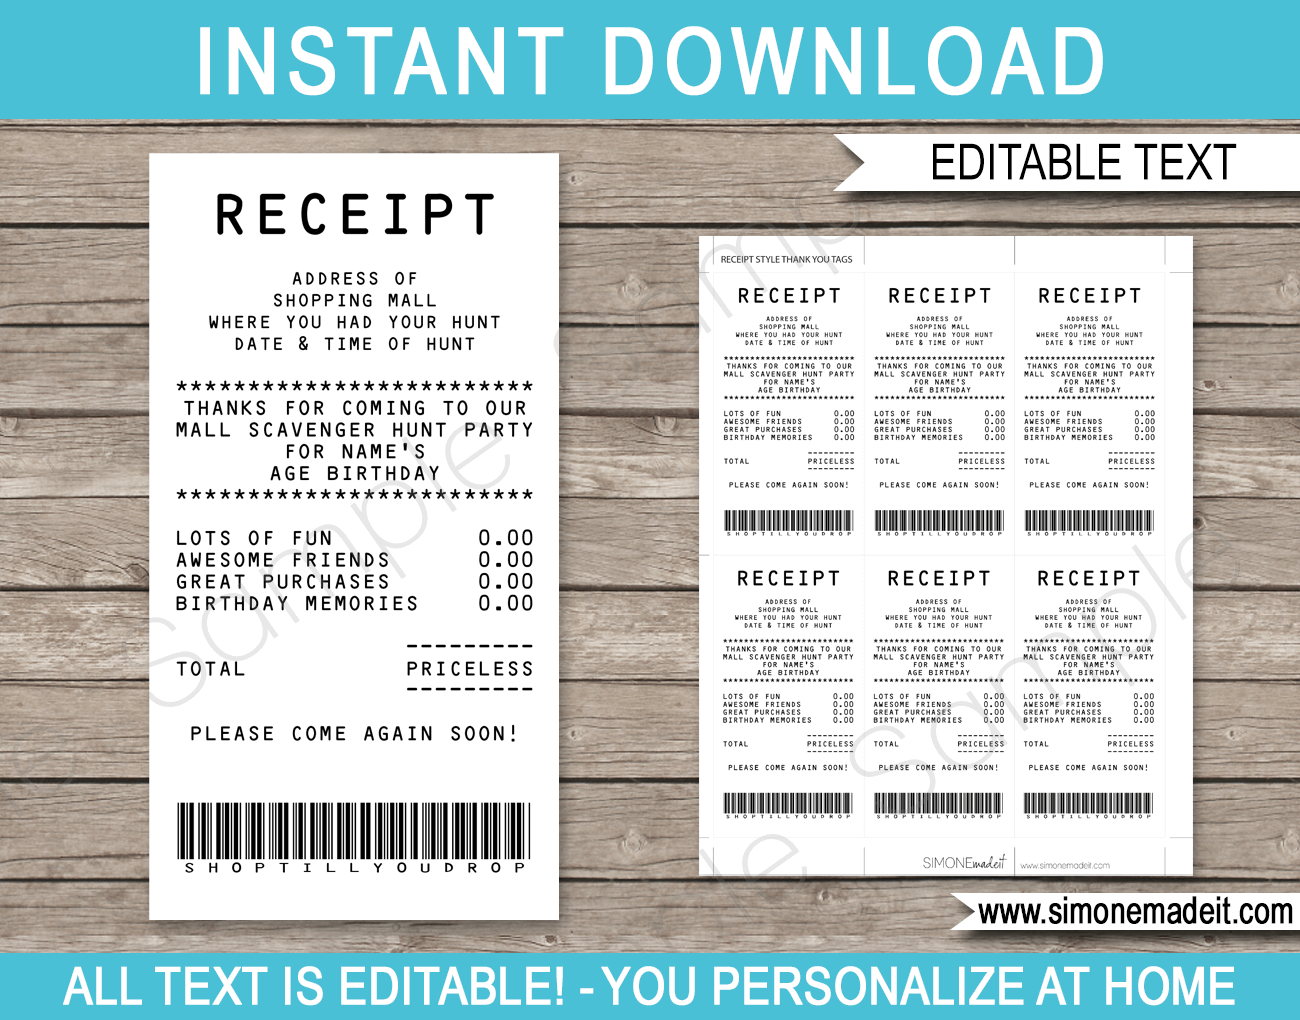 Mall Scavenger Hunt Party Receipt Favor Tags Template.